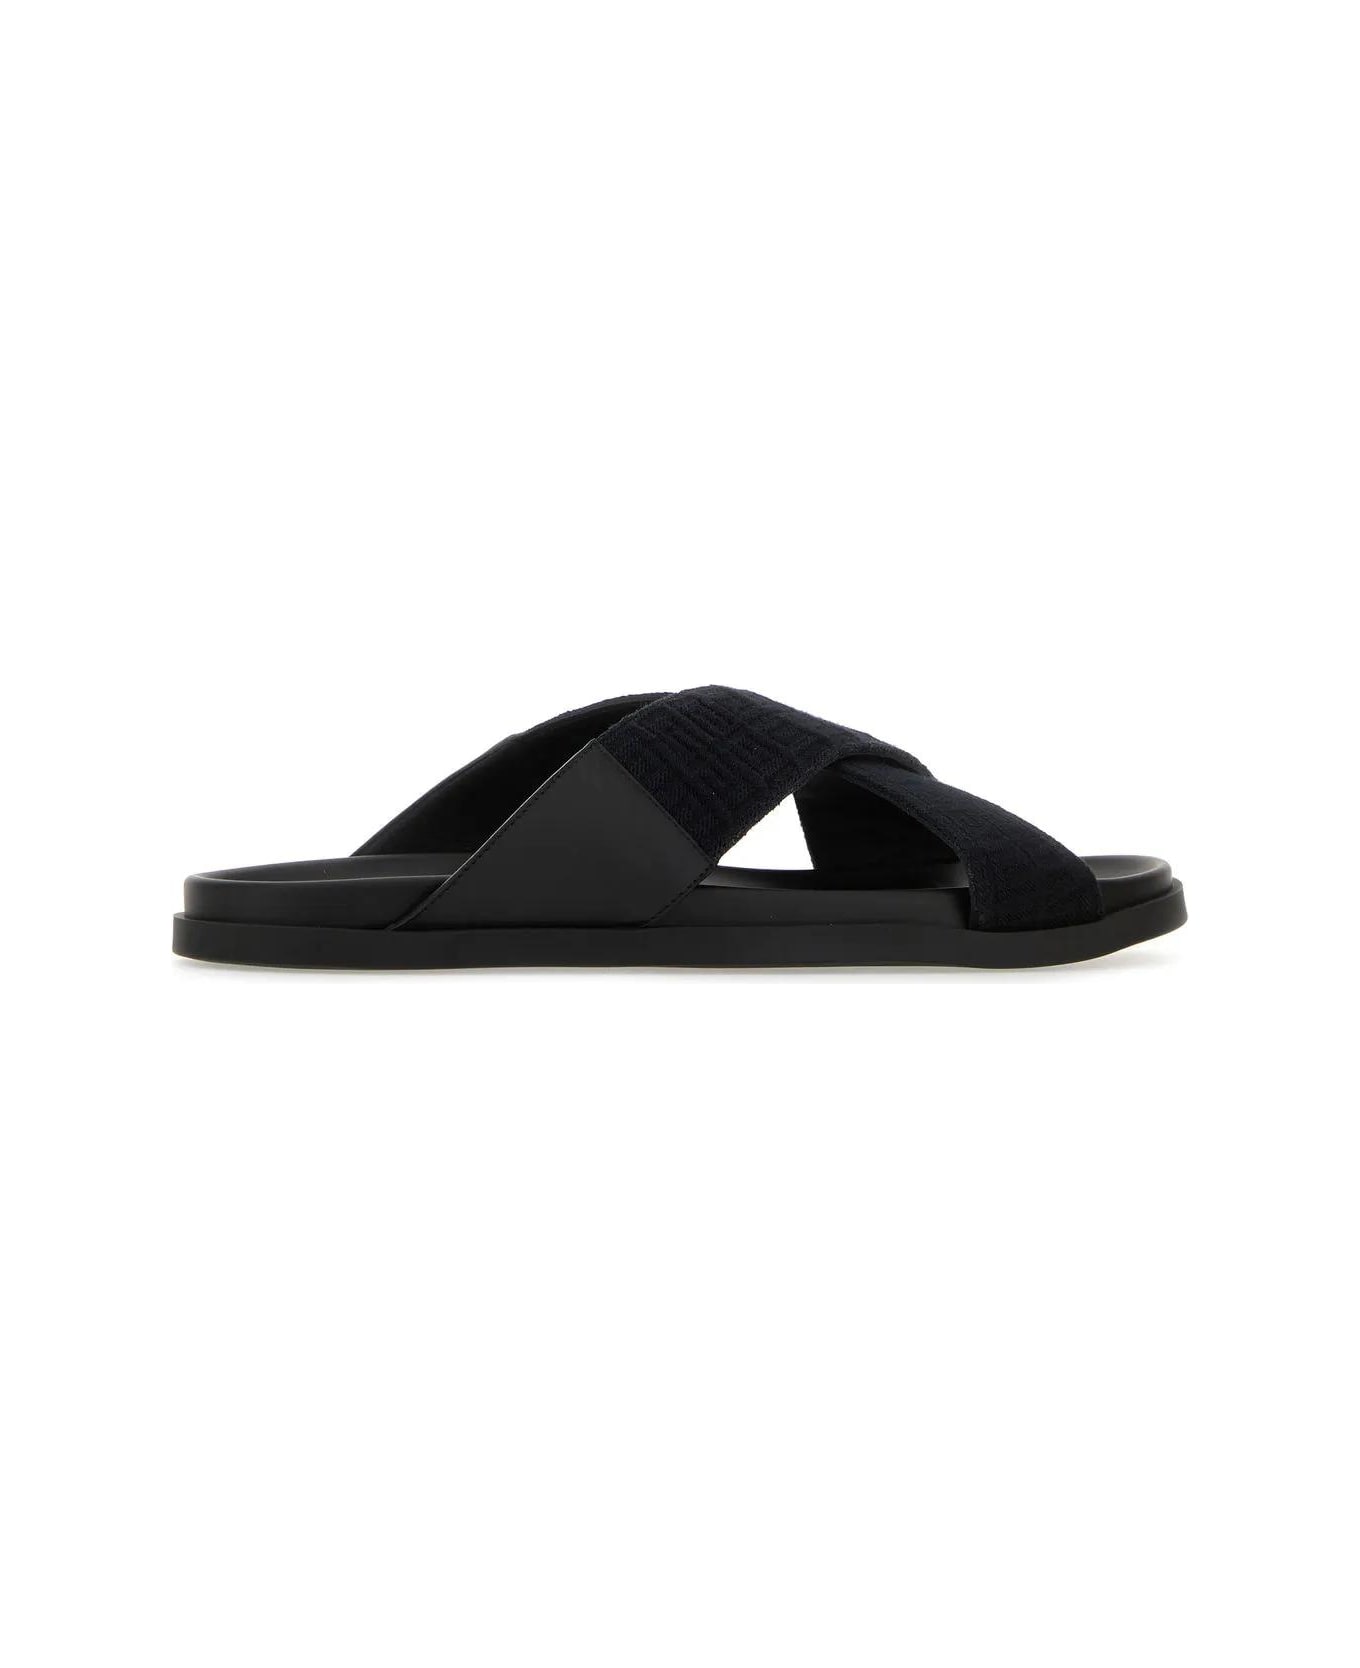 Givenchy Black Leather And Cotton Slippers - BLACK